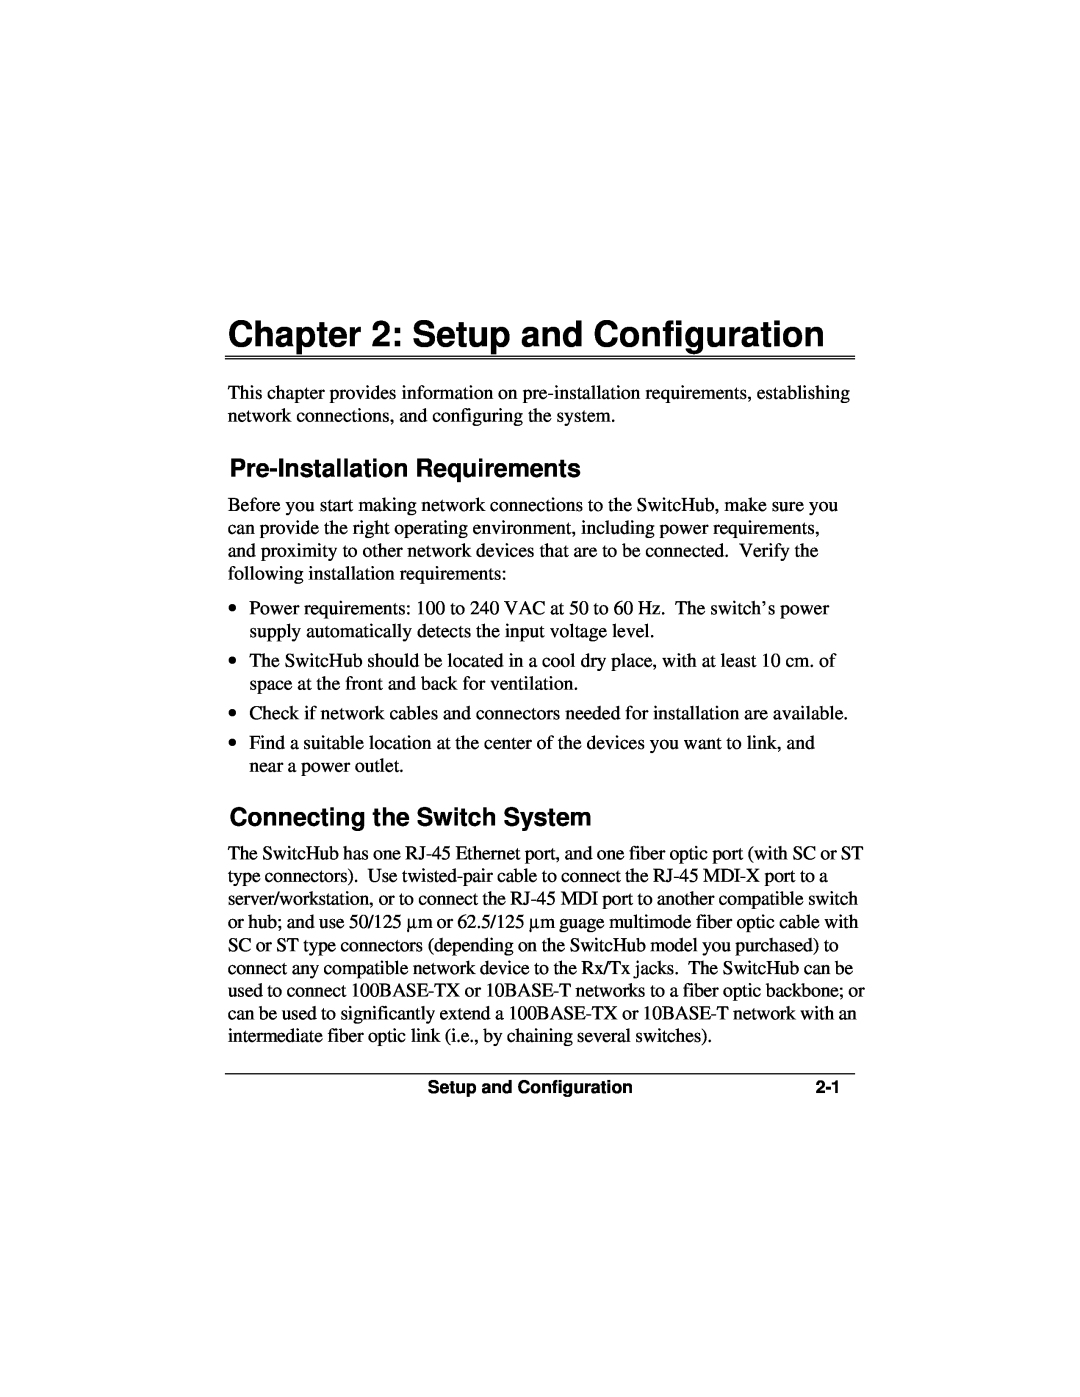 Accton Technology ES3002-TF manual Setup and Configuration, Pre-Installation Requirements, Connecting the Switch System 